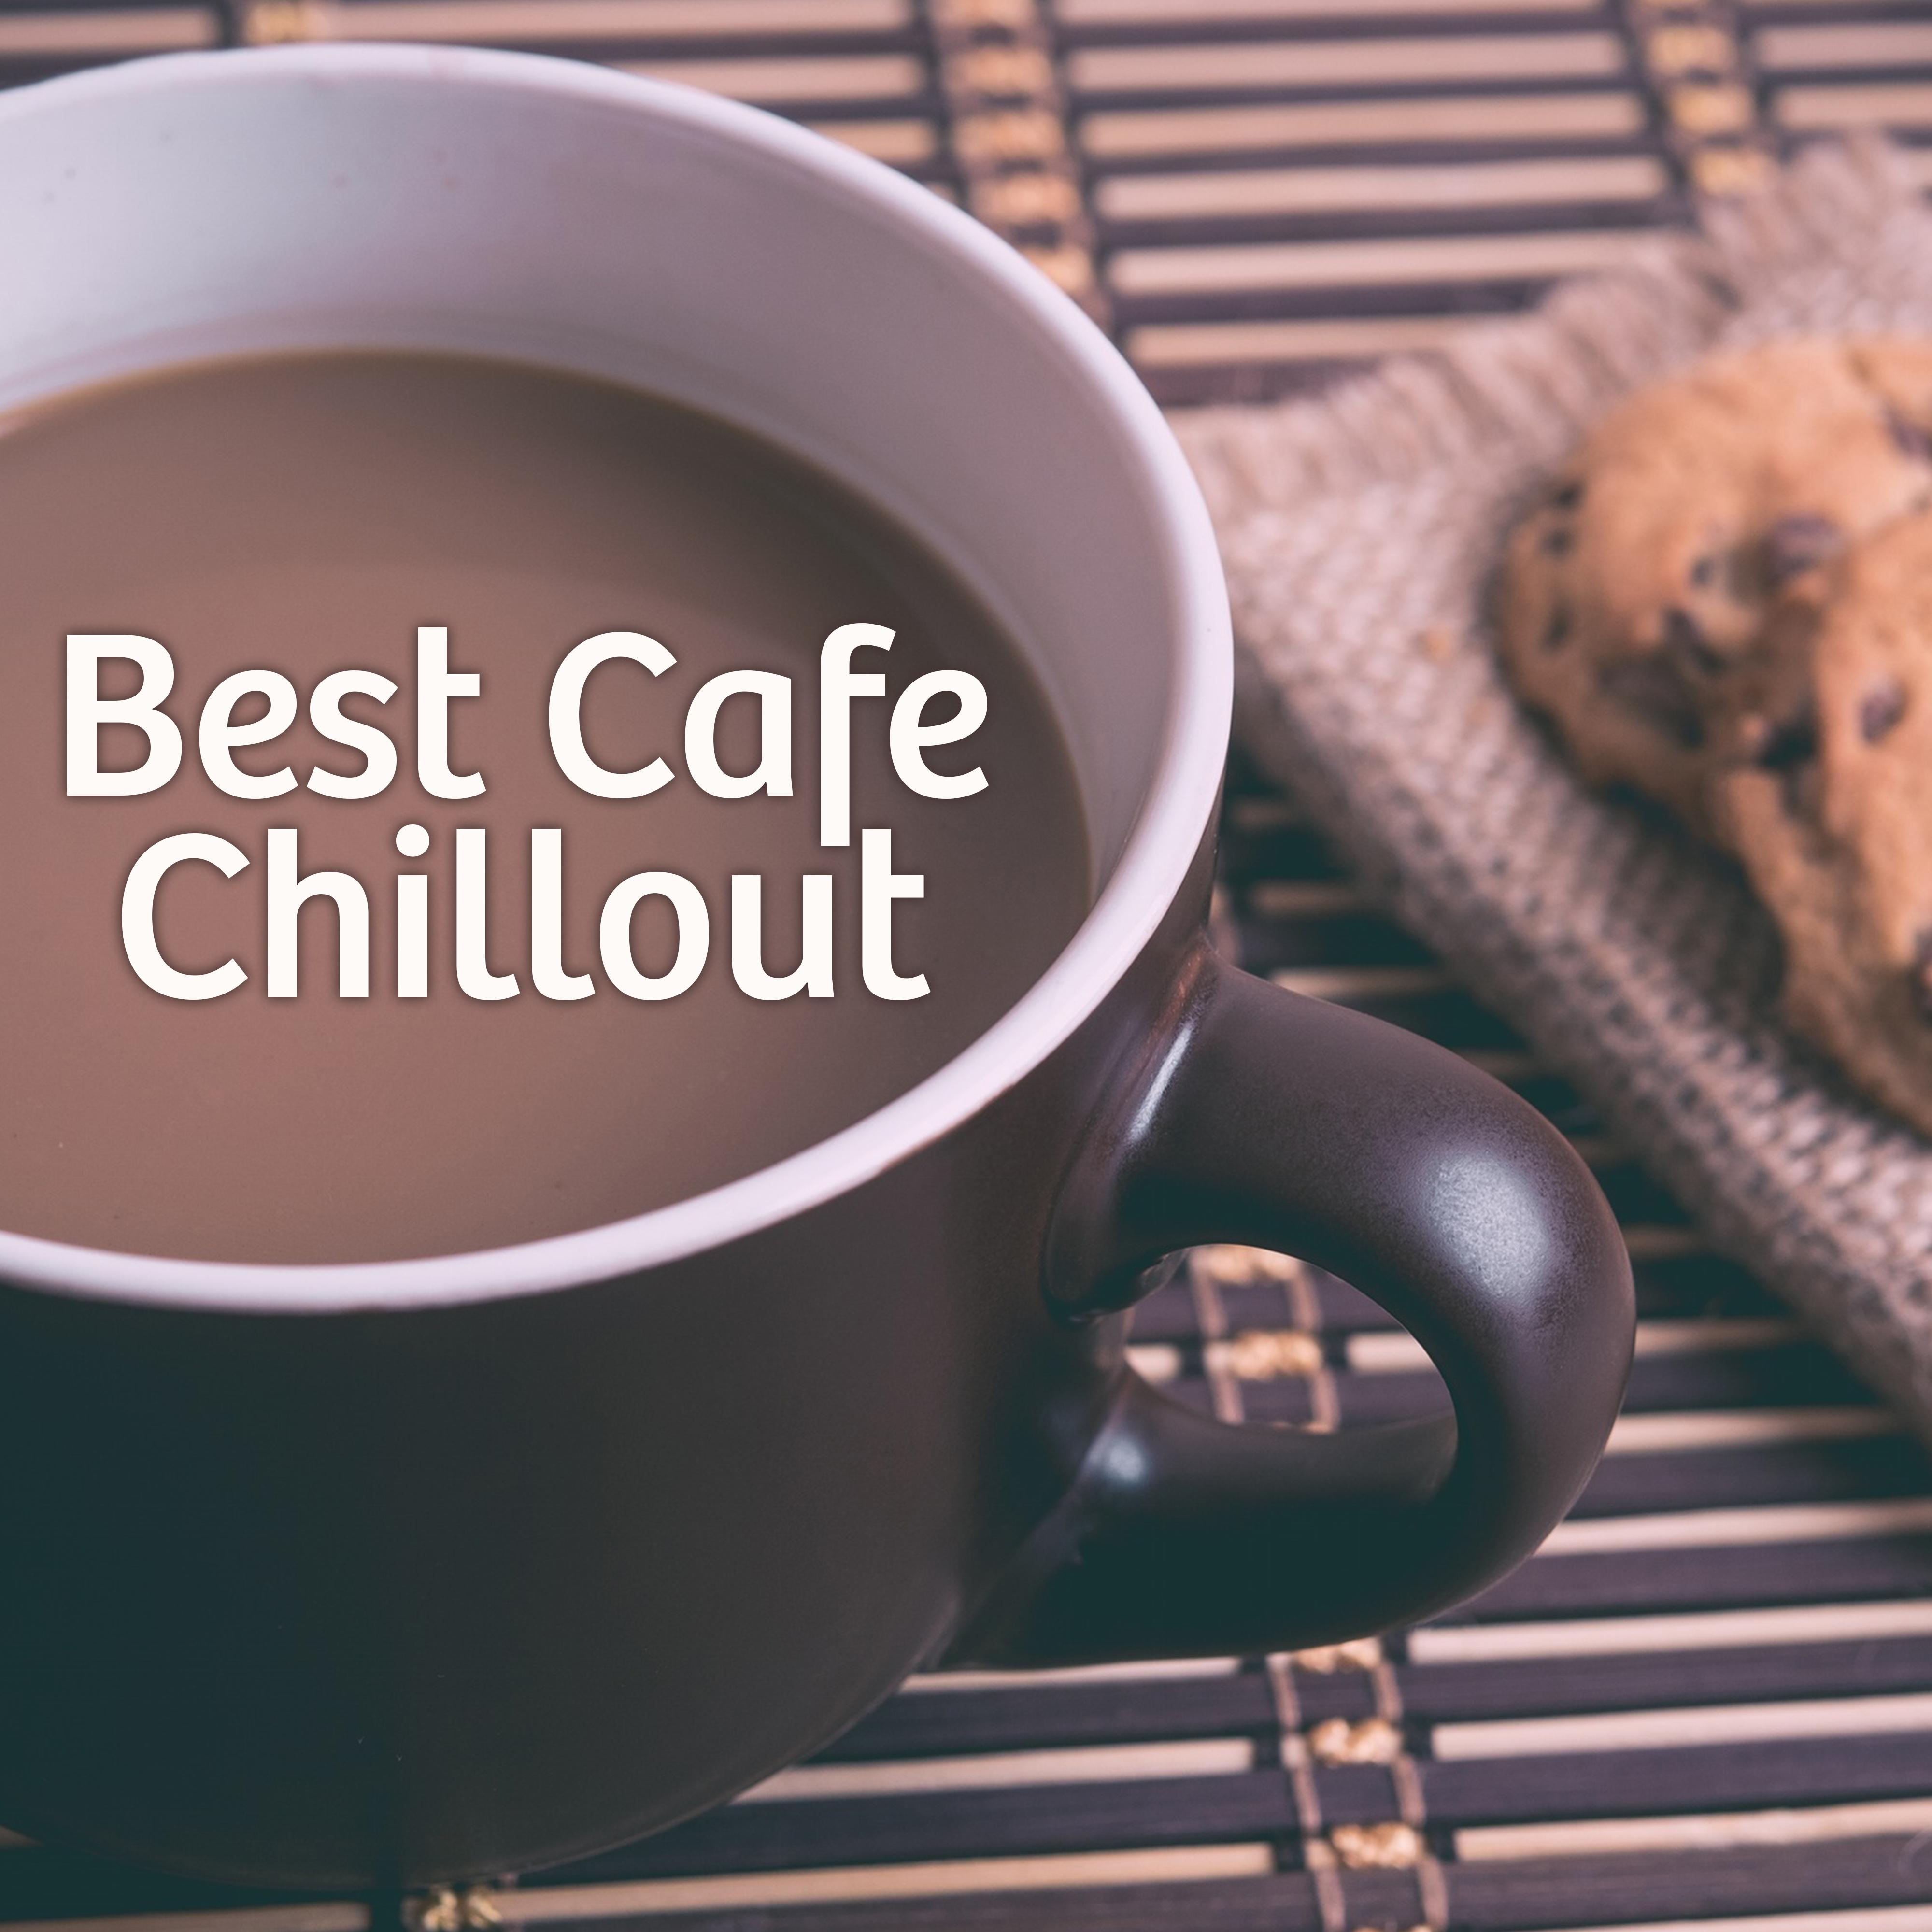 Best Cafe Chillout  Ocean Dreams, Relaxation Time, Pure Waves, Chillout Music, Relaxed Mind, Cocktail Time